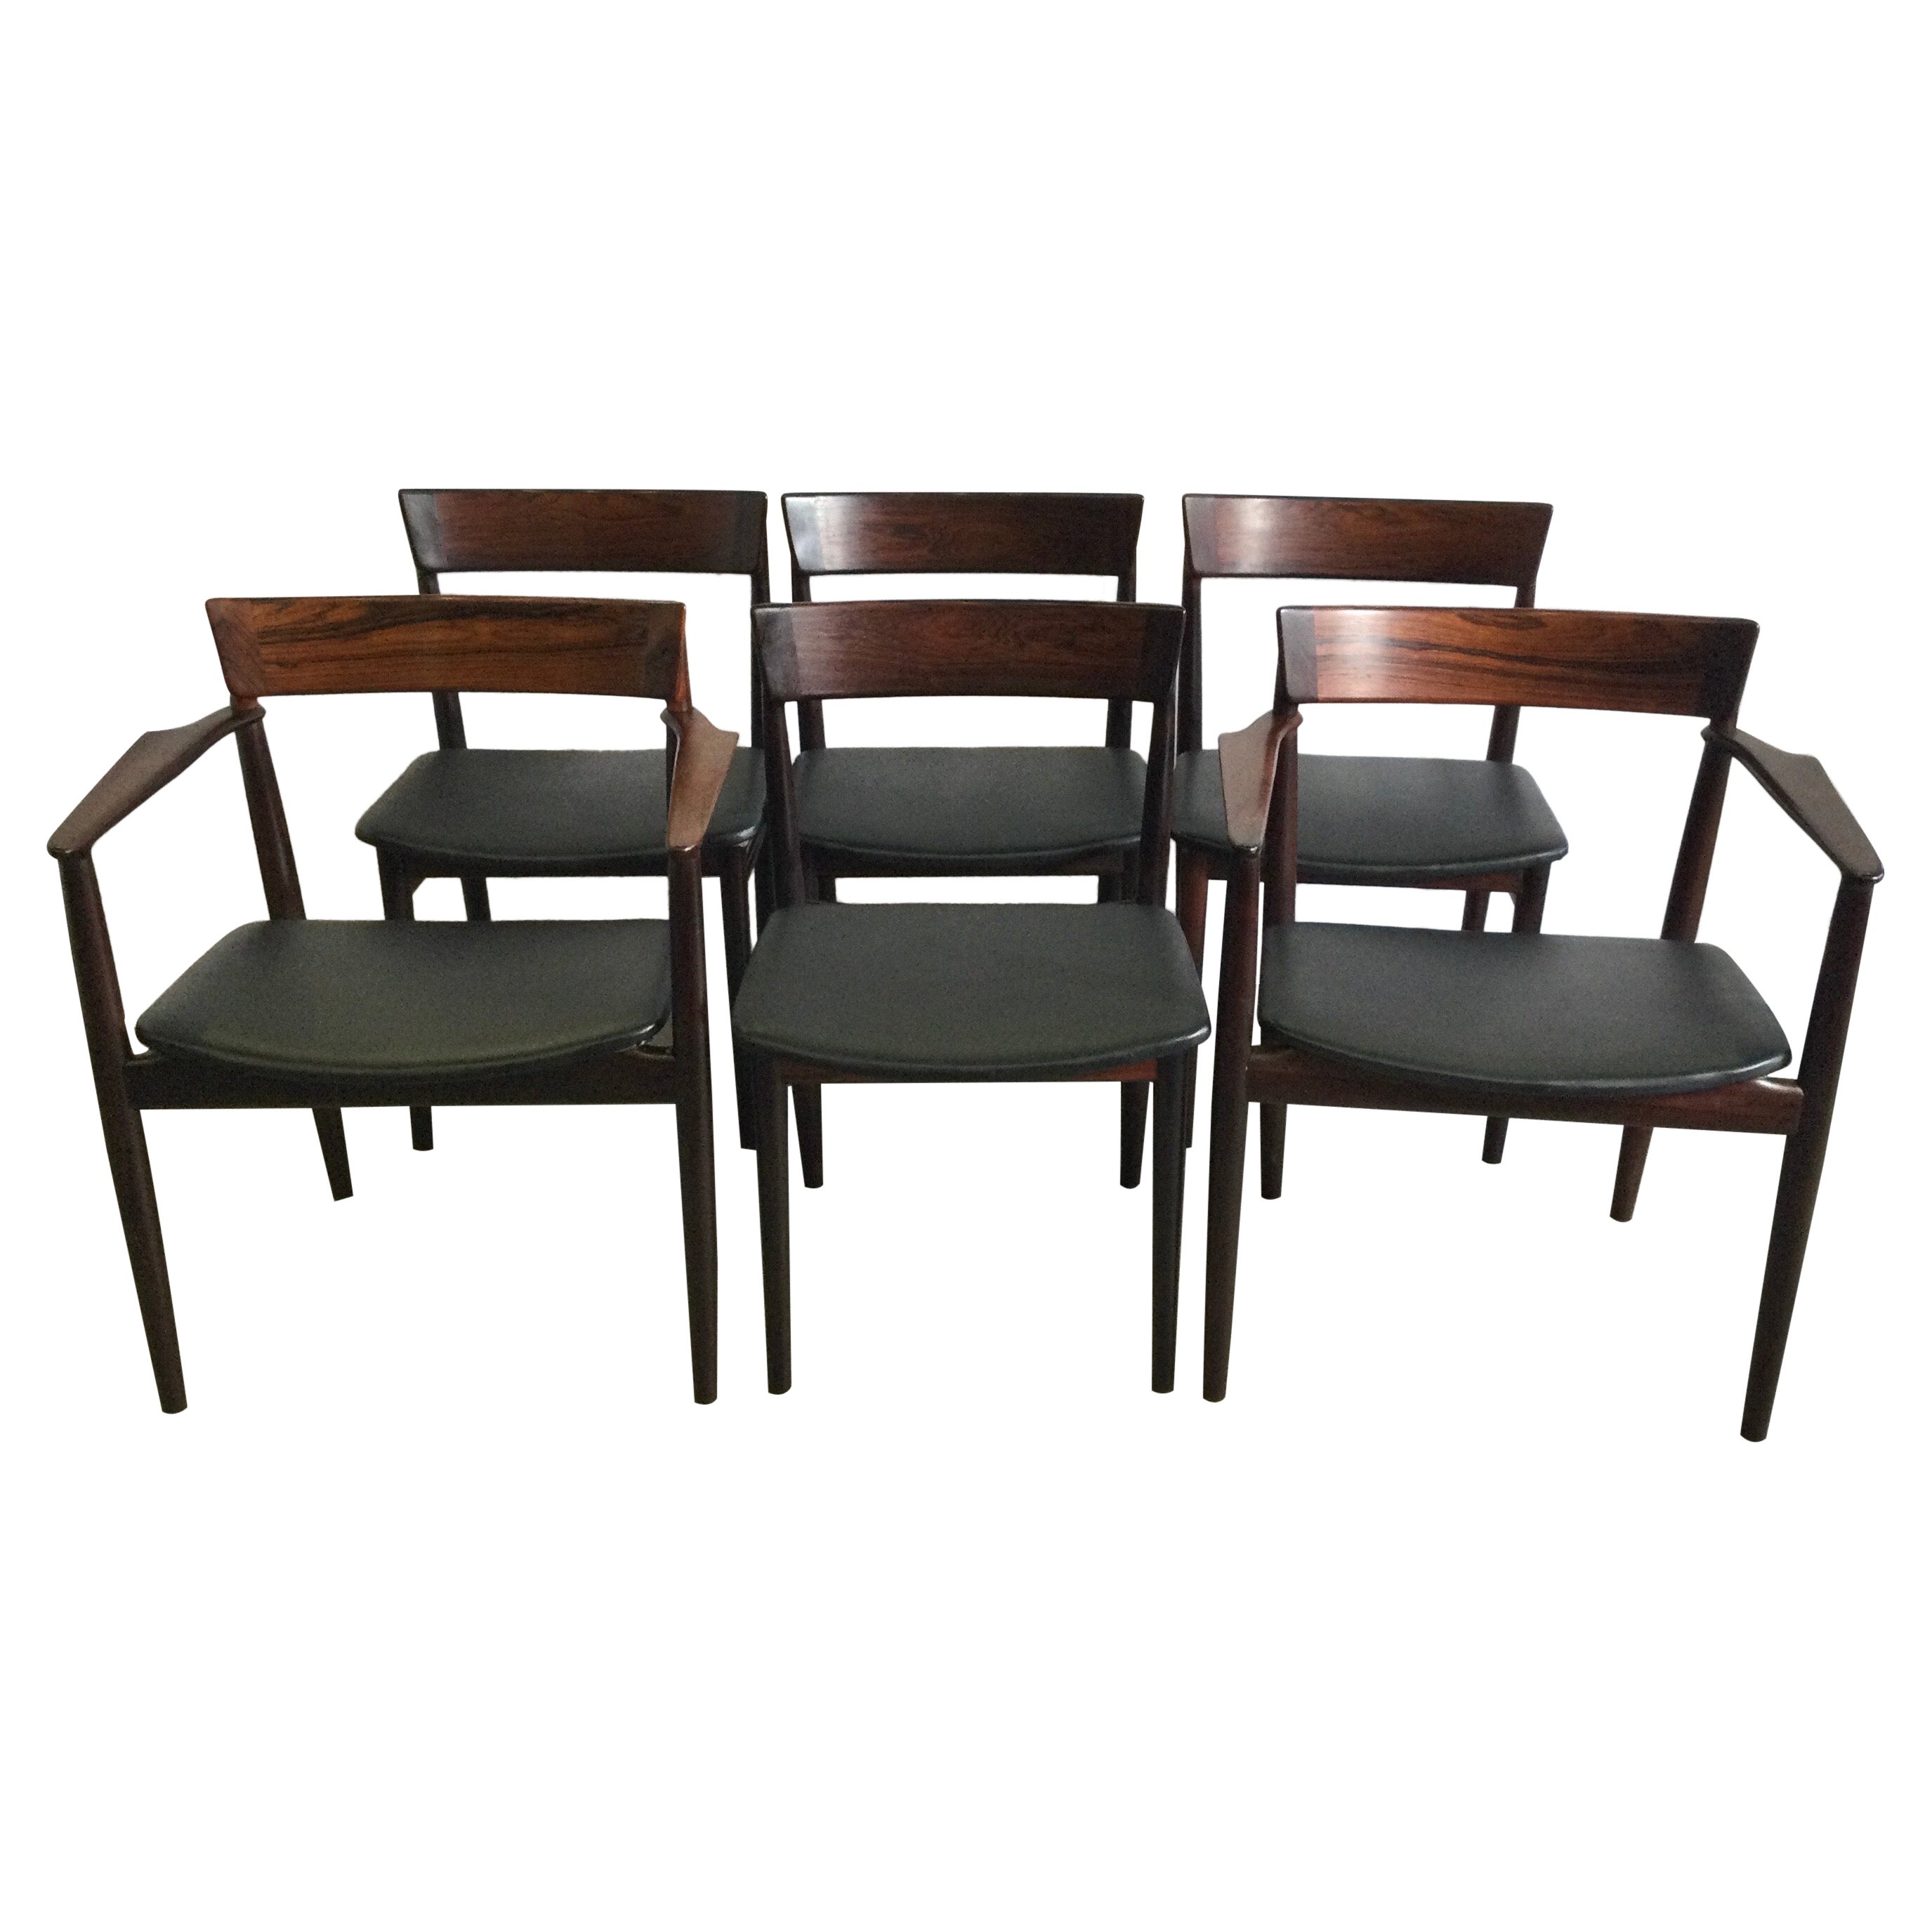 St of Six Rosewood Dining Chairs by Henry Rosengren Hansen, 1960's